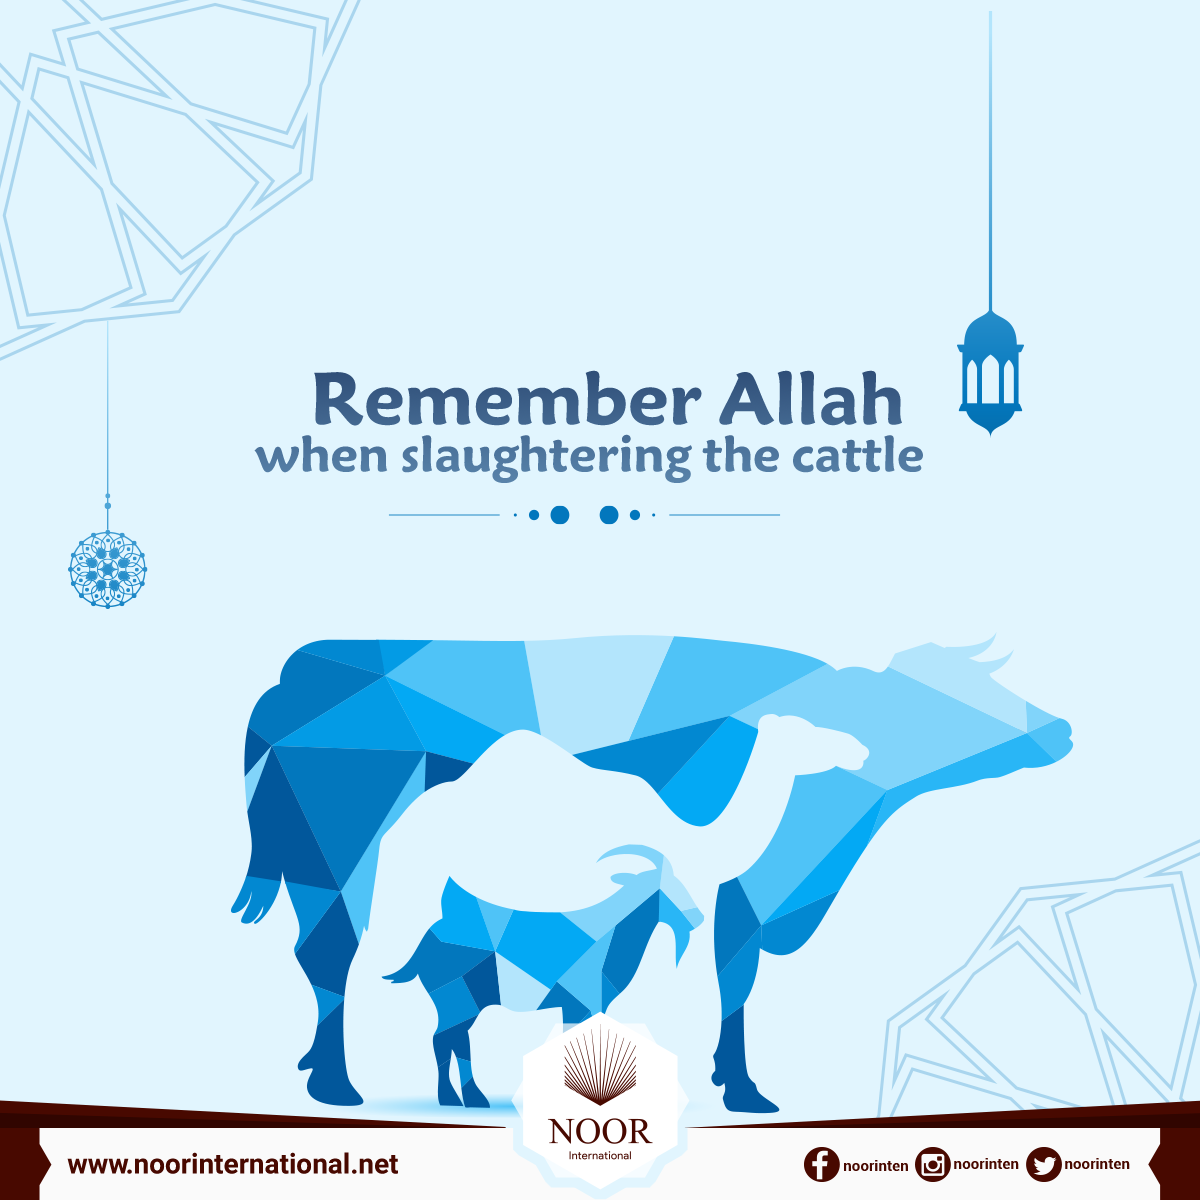 Remember Allah when slaughtering the cattle